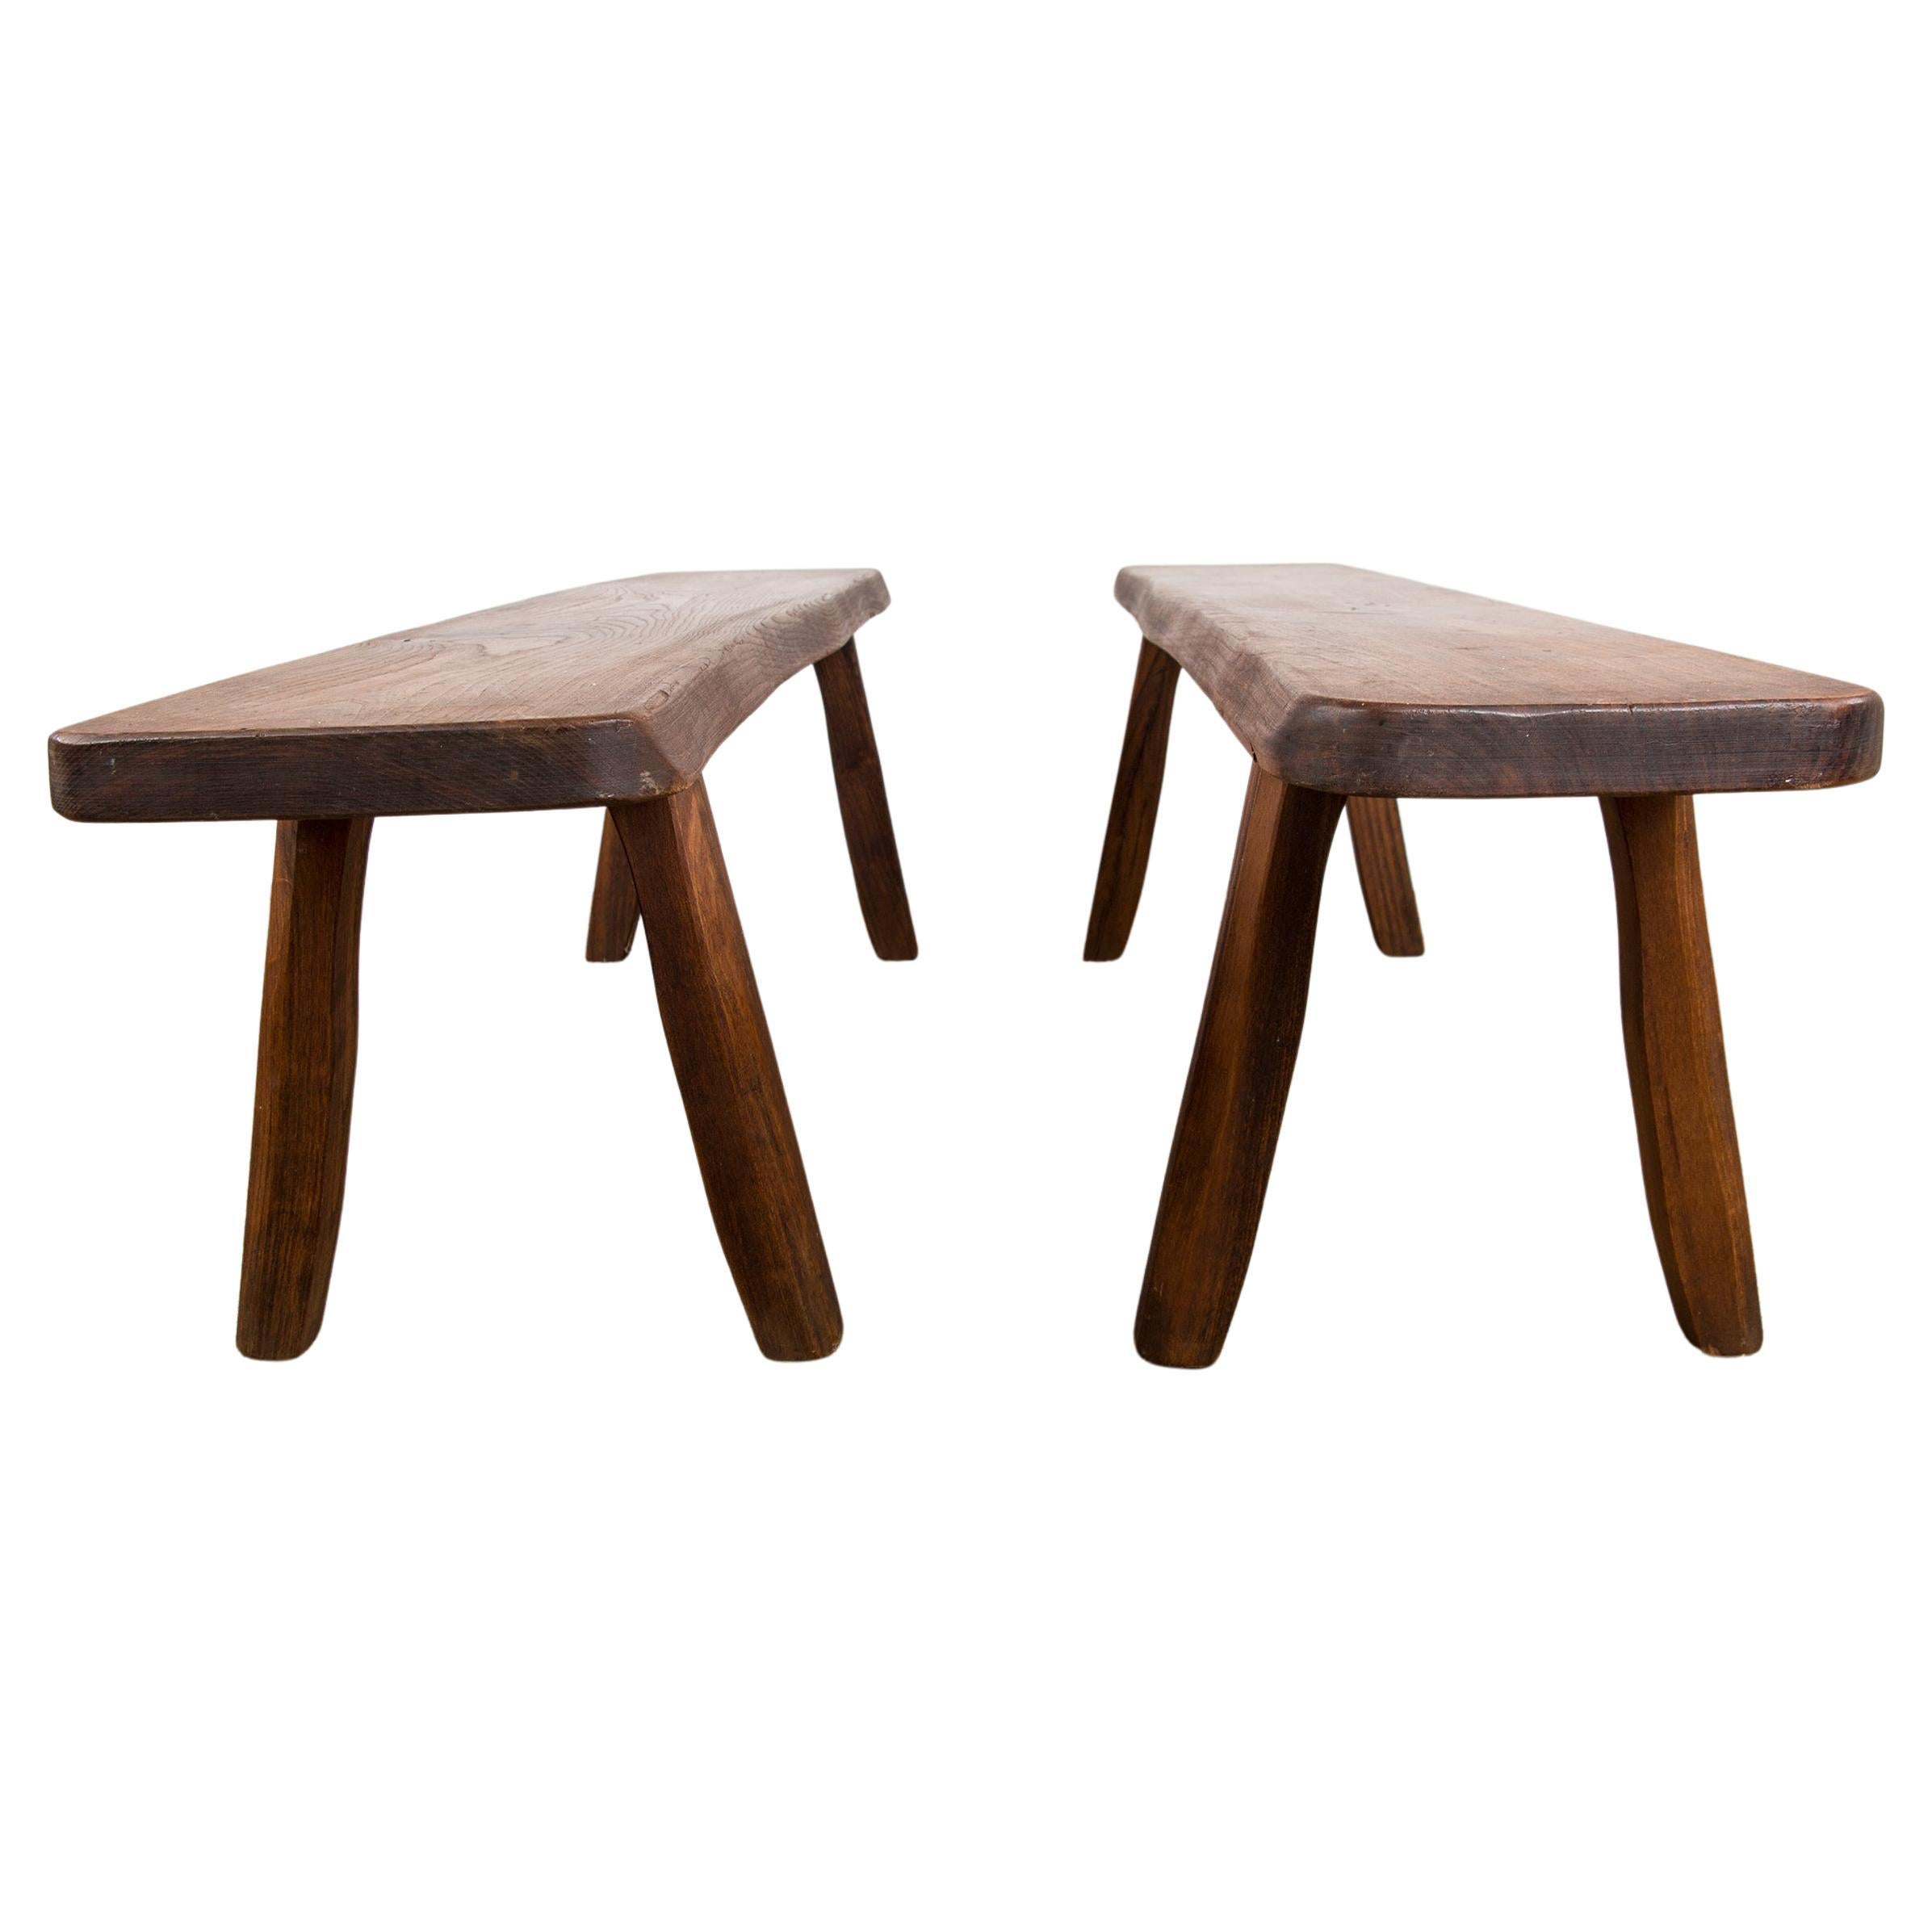 Pair of Scandinavian benches in Solid Elm by Olavi Hanninen 1960. For Sale